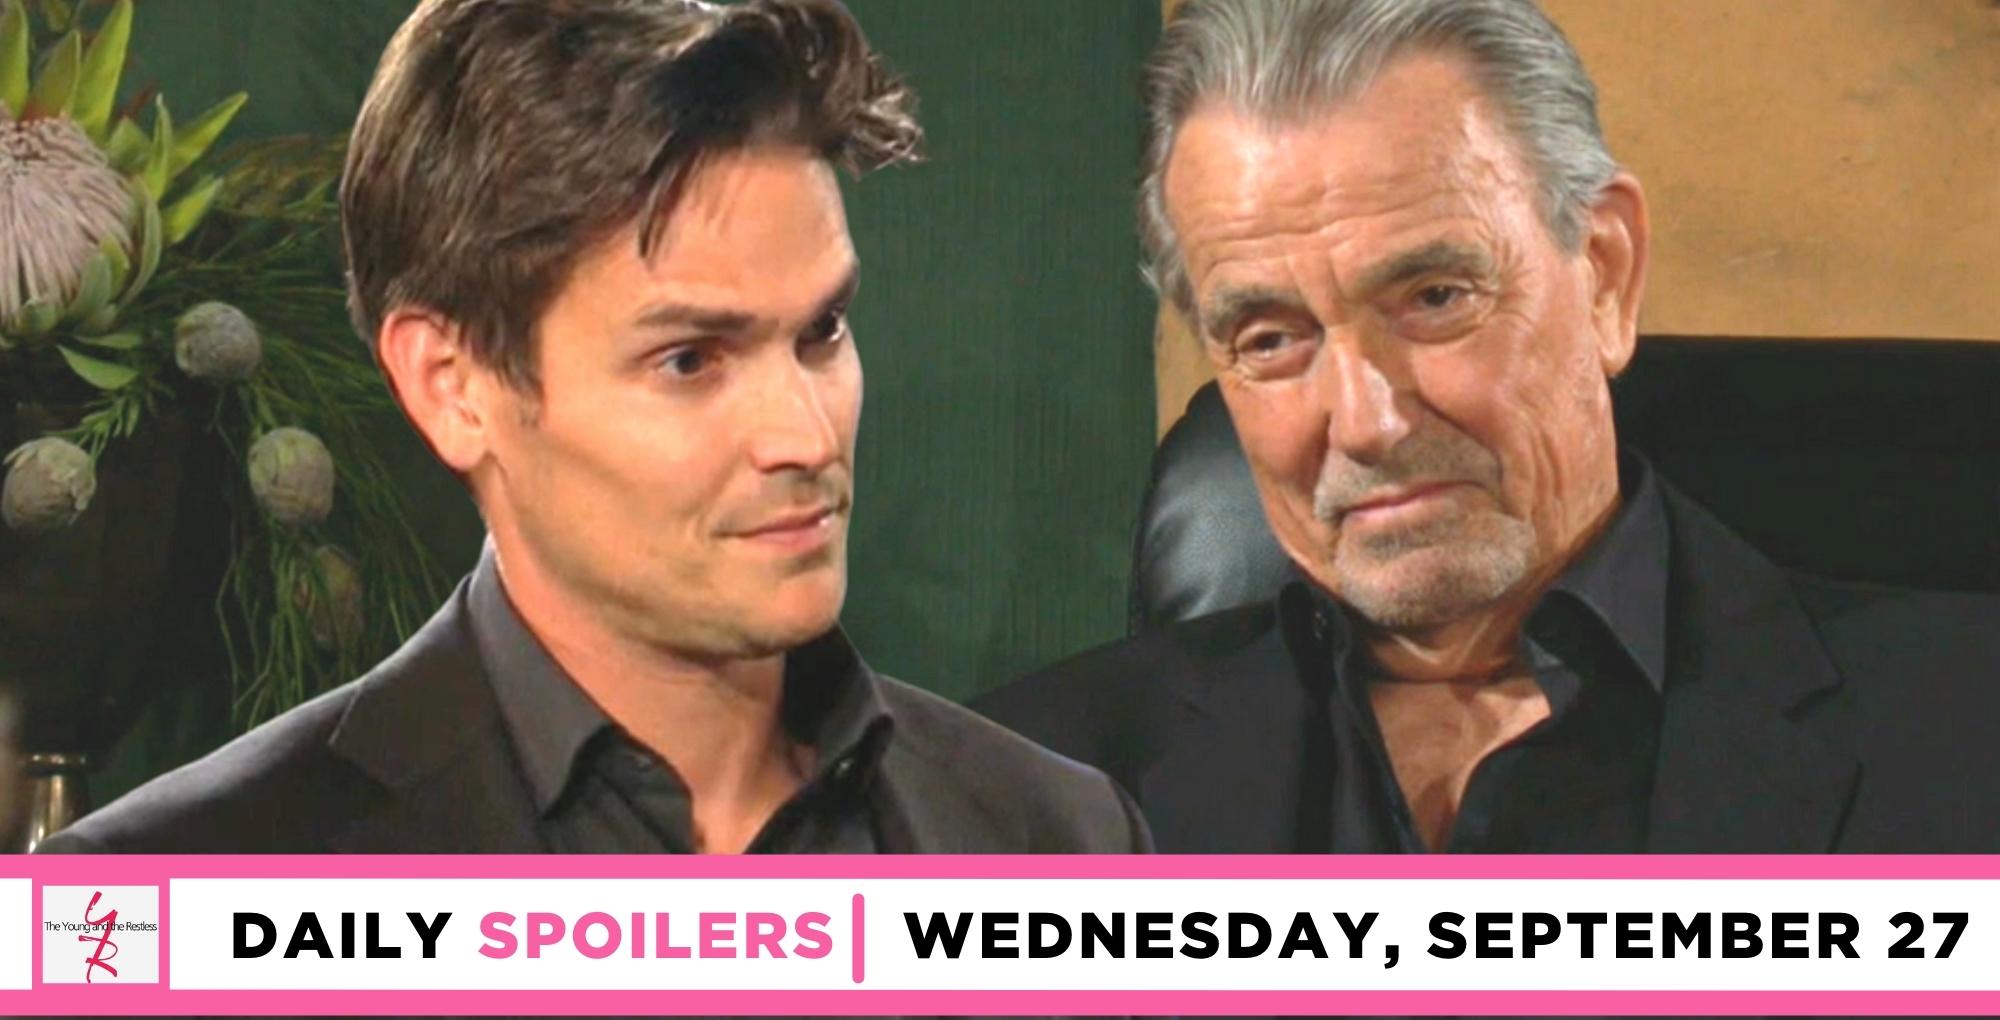 the young and the restless spoilers for september 27, 2023, has adam looking at a smiling victor.